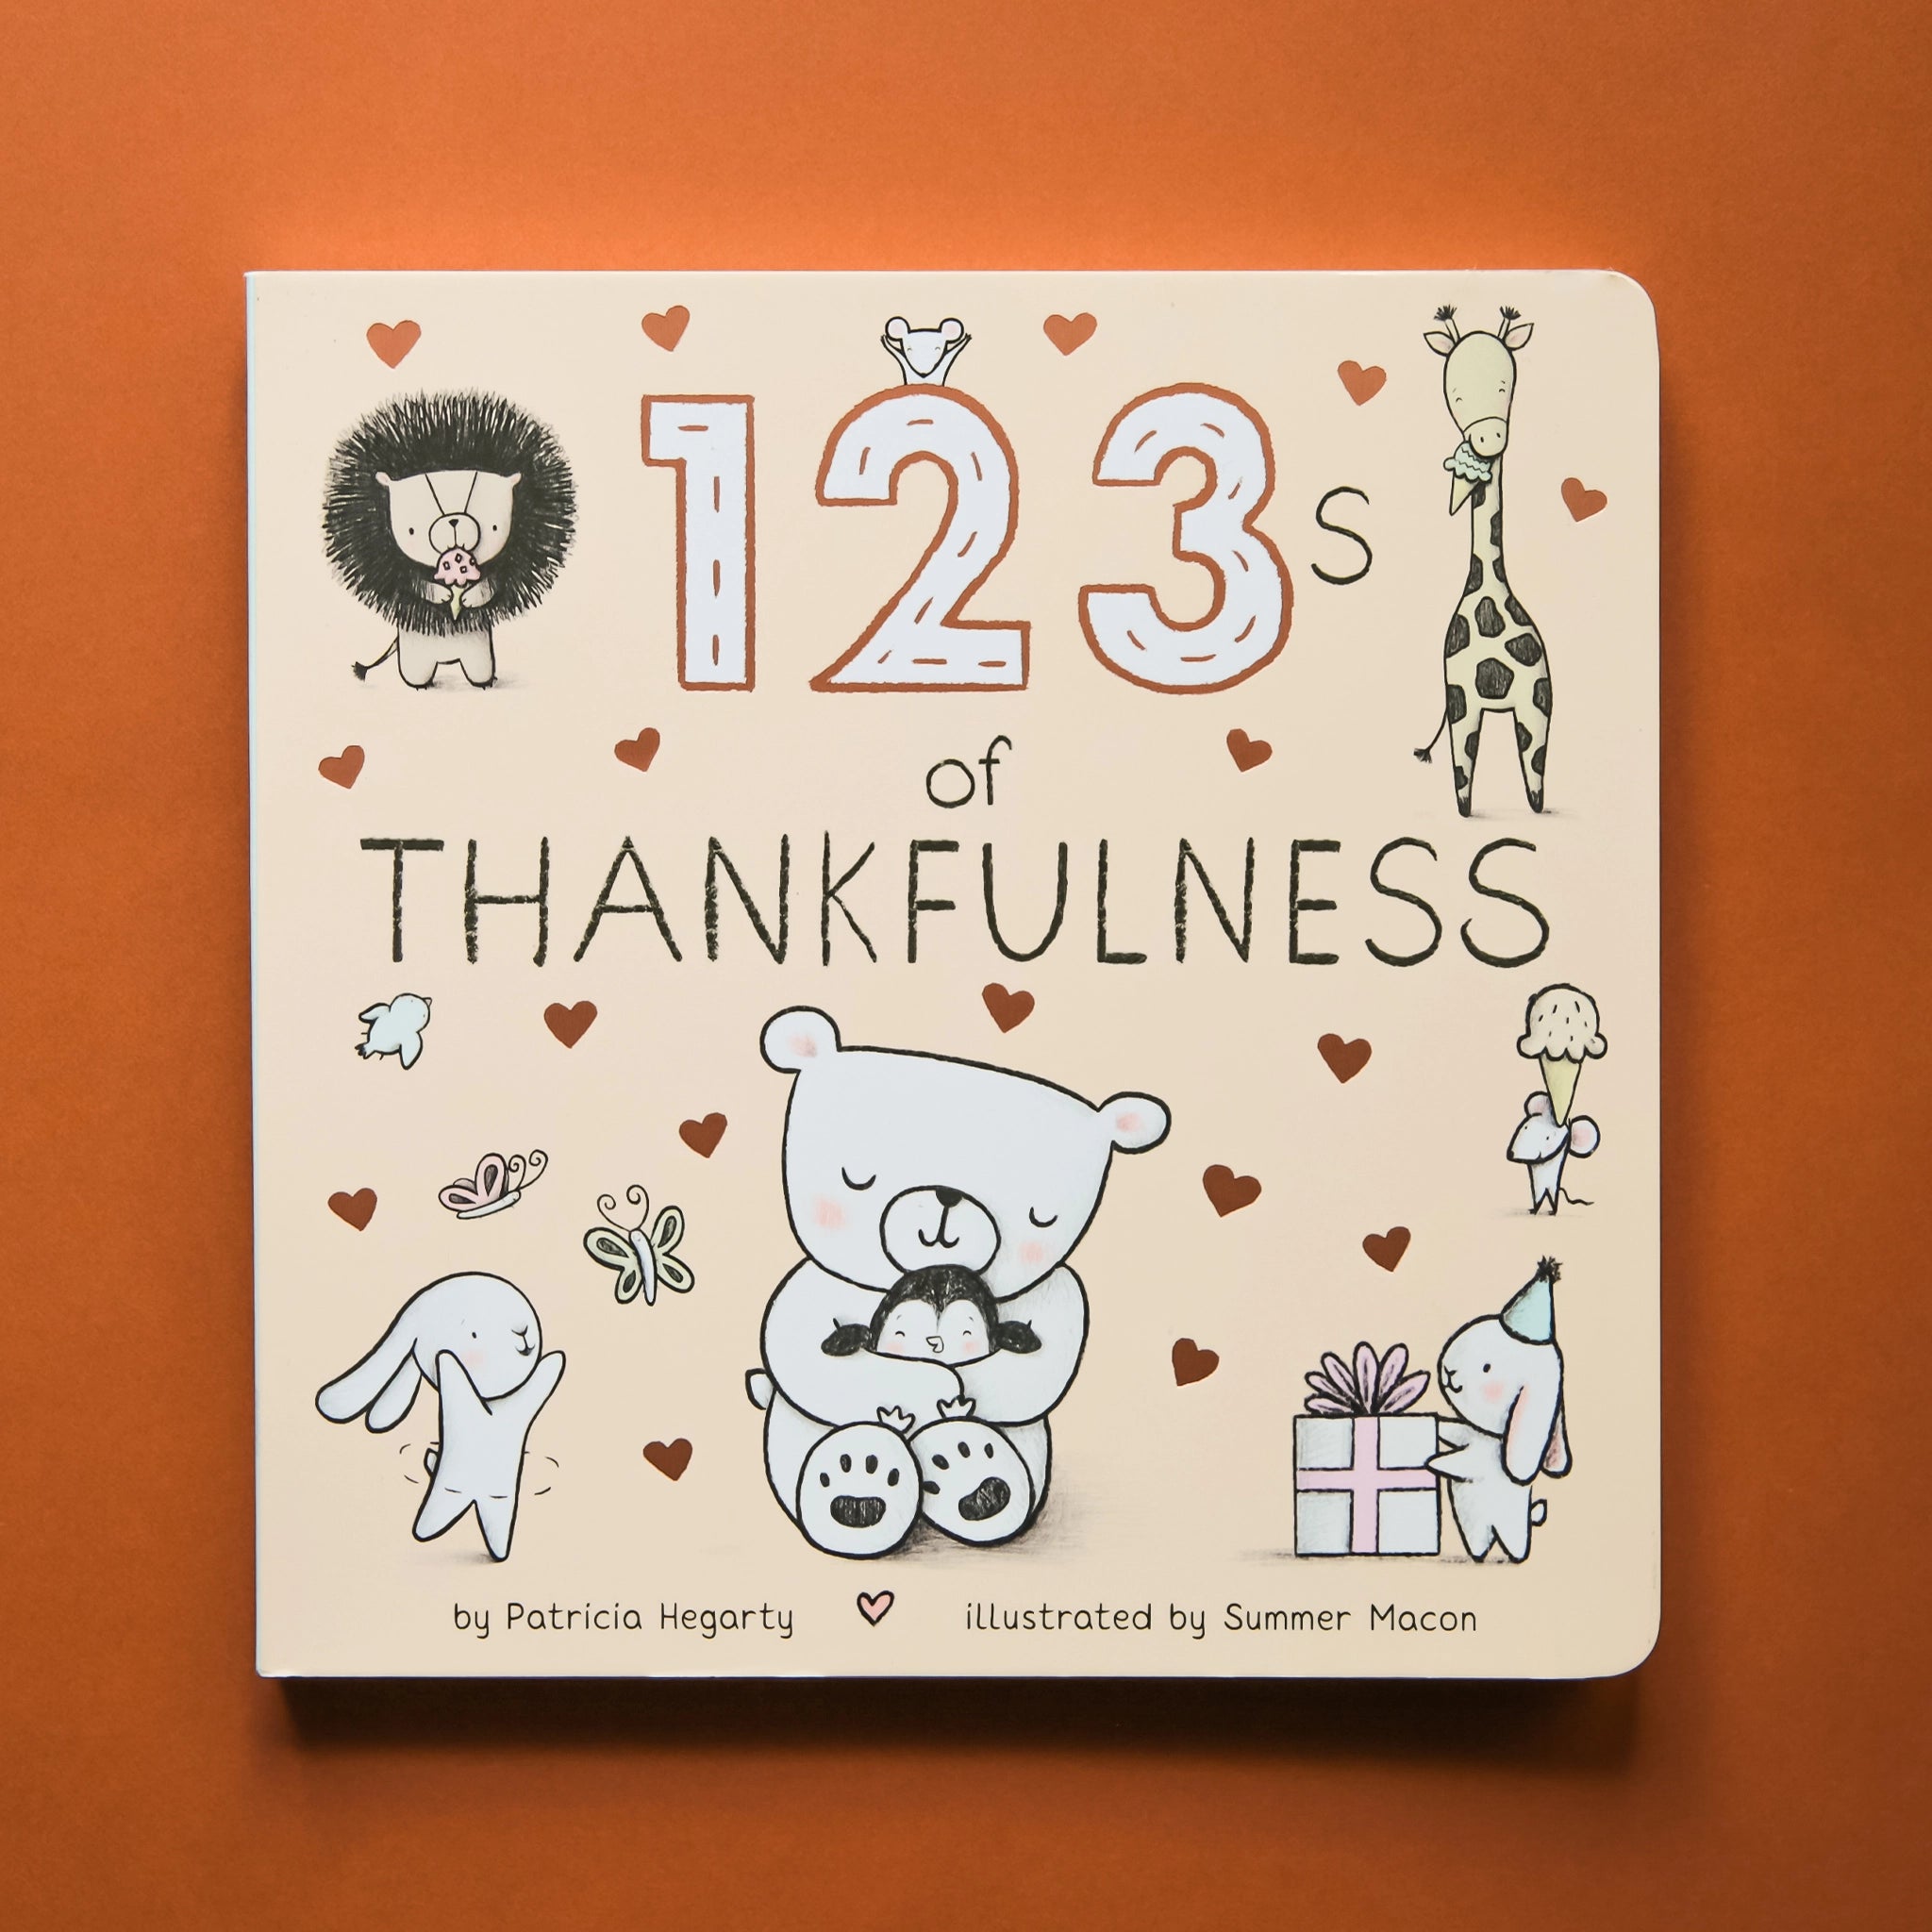 Small cream colored children&#39;s book titled &quot;123&#39;s of Thankfulness&quot; By Patricia Hegarty, Illustrated by Summer Macon. On the cover are illustrated gold hearts and black and white animals, including a lion, giraffe eating ice cream, mice, rabbits, and a bear hugging a baby penguin.